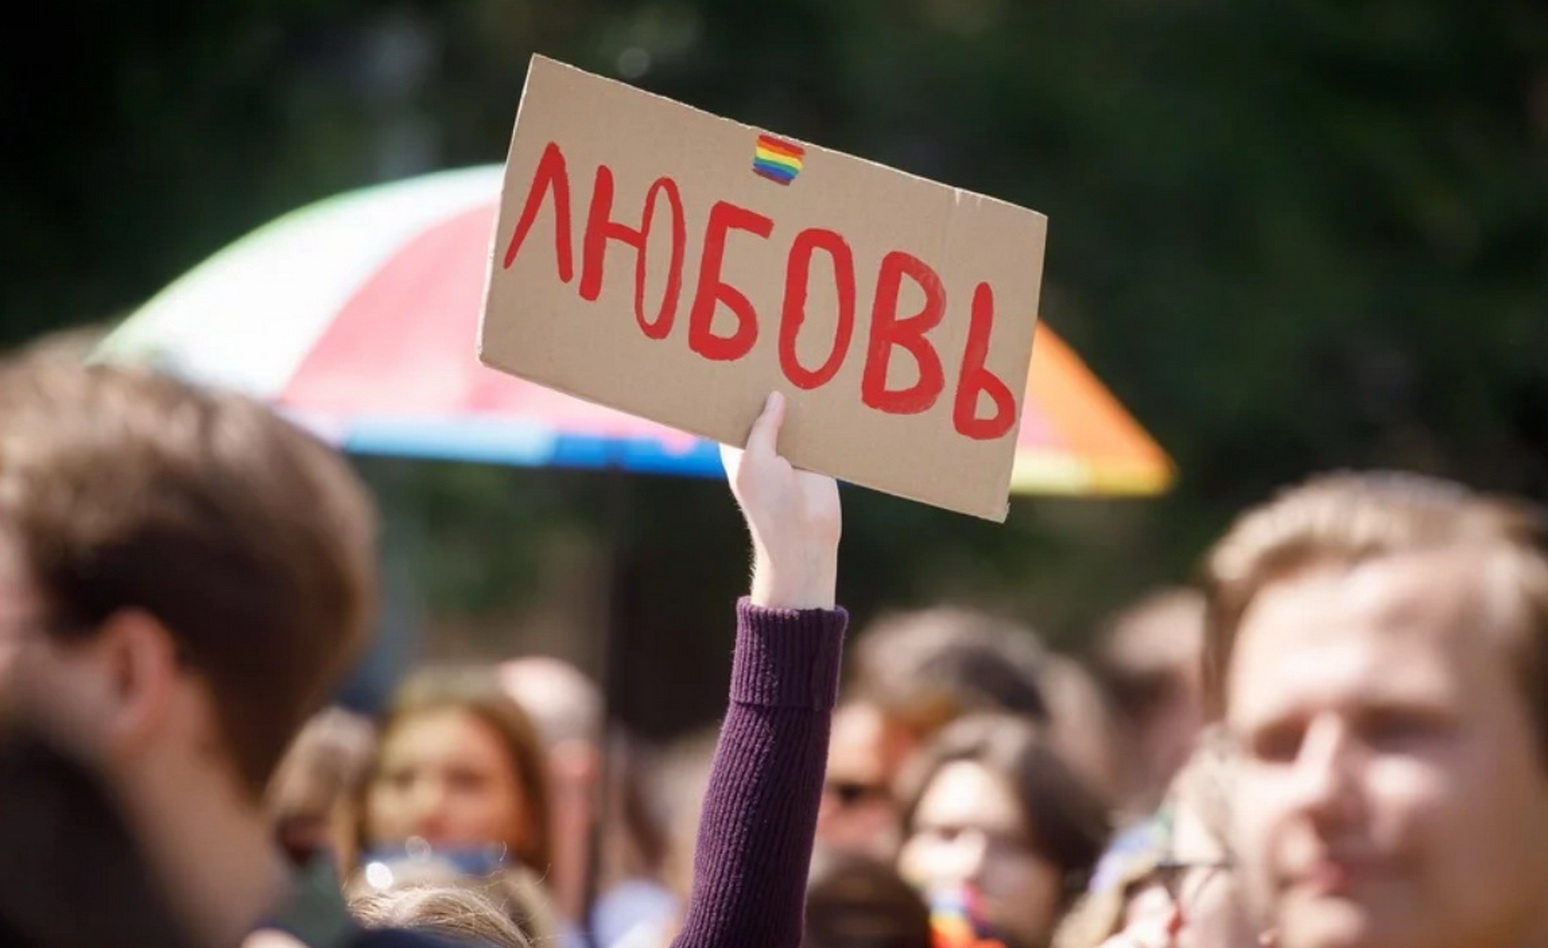 We see how LGBT people are being made into the same kind of scarecrow in Russia that the Nazis made of Jews. What does this mean for Belarusians?